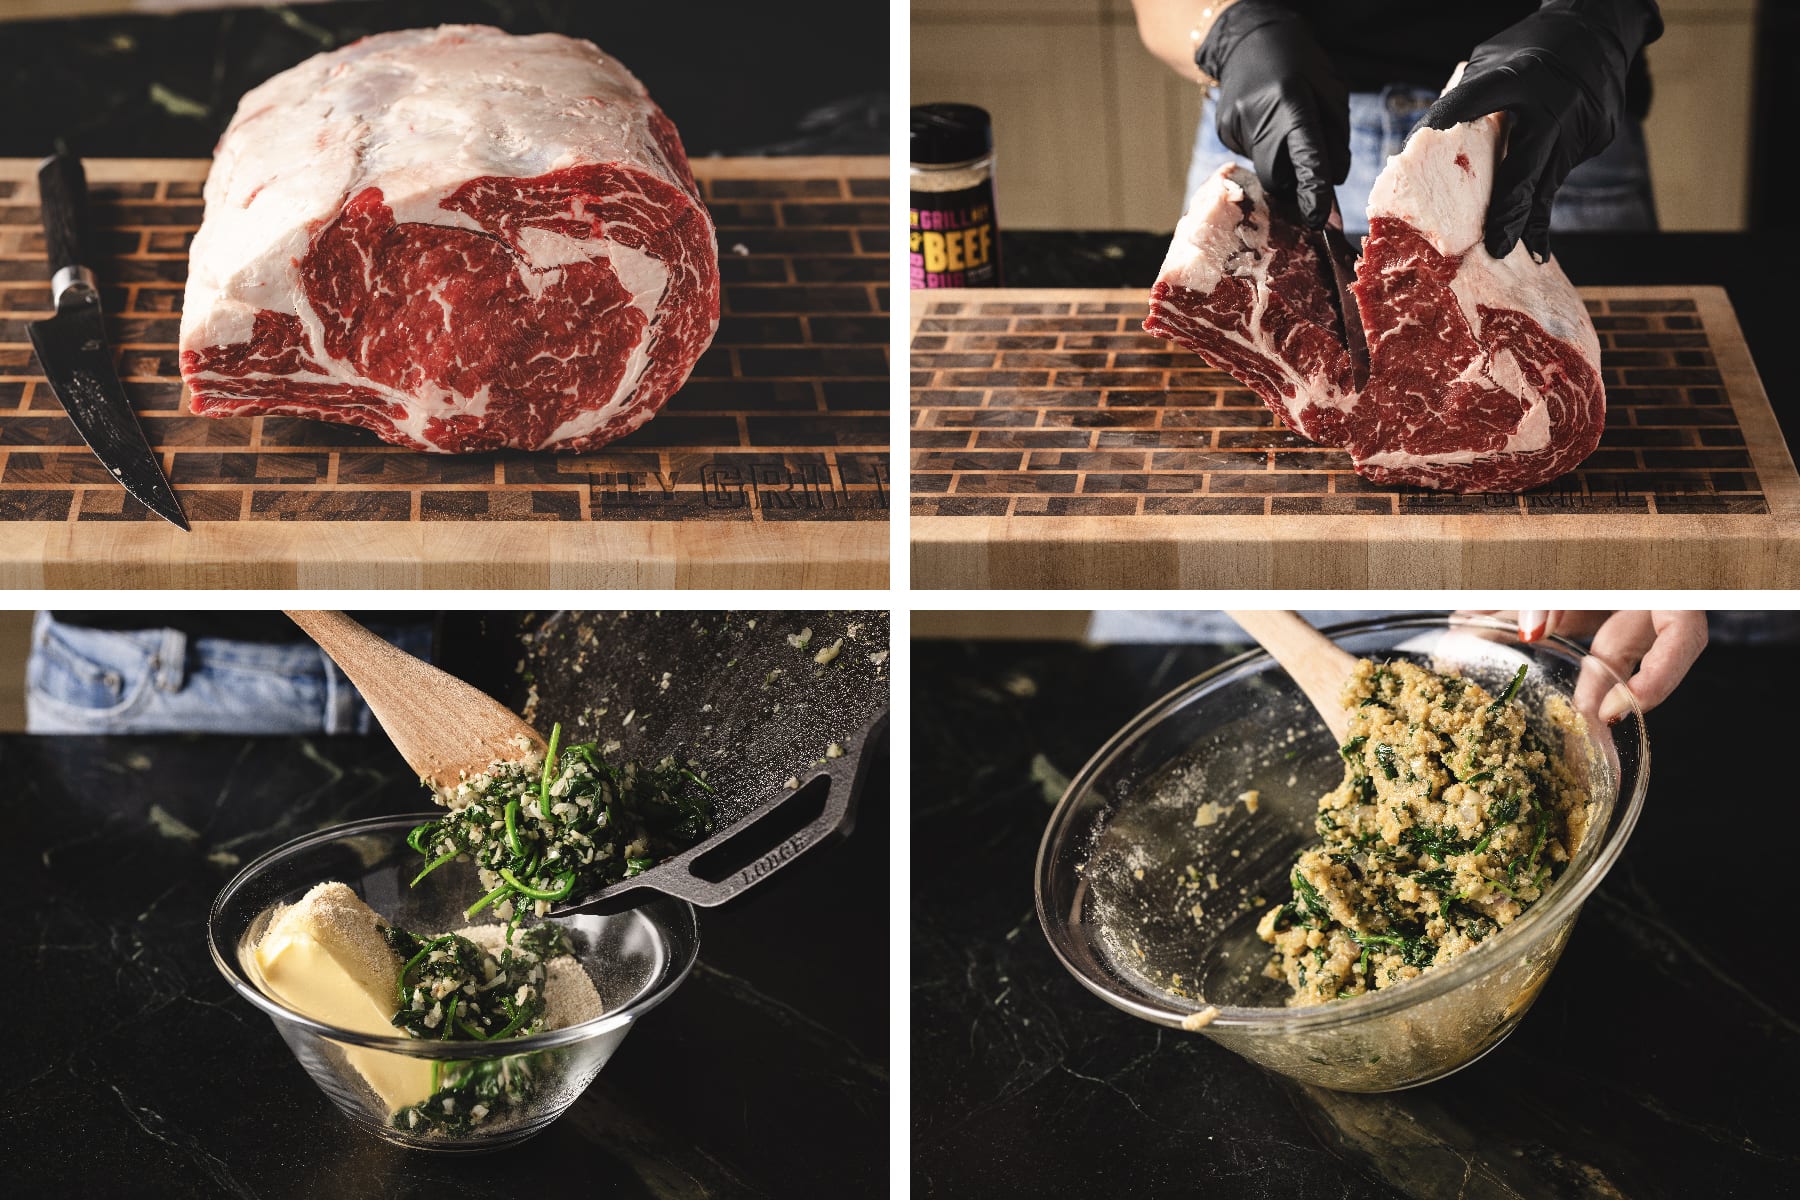 Prime rib sliced open and stuffing made in 4 steps.